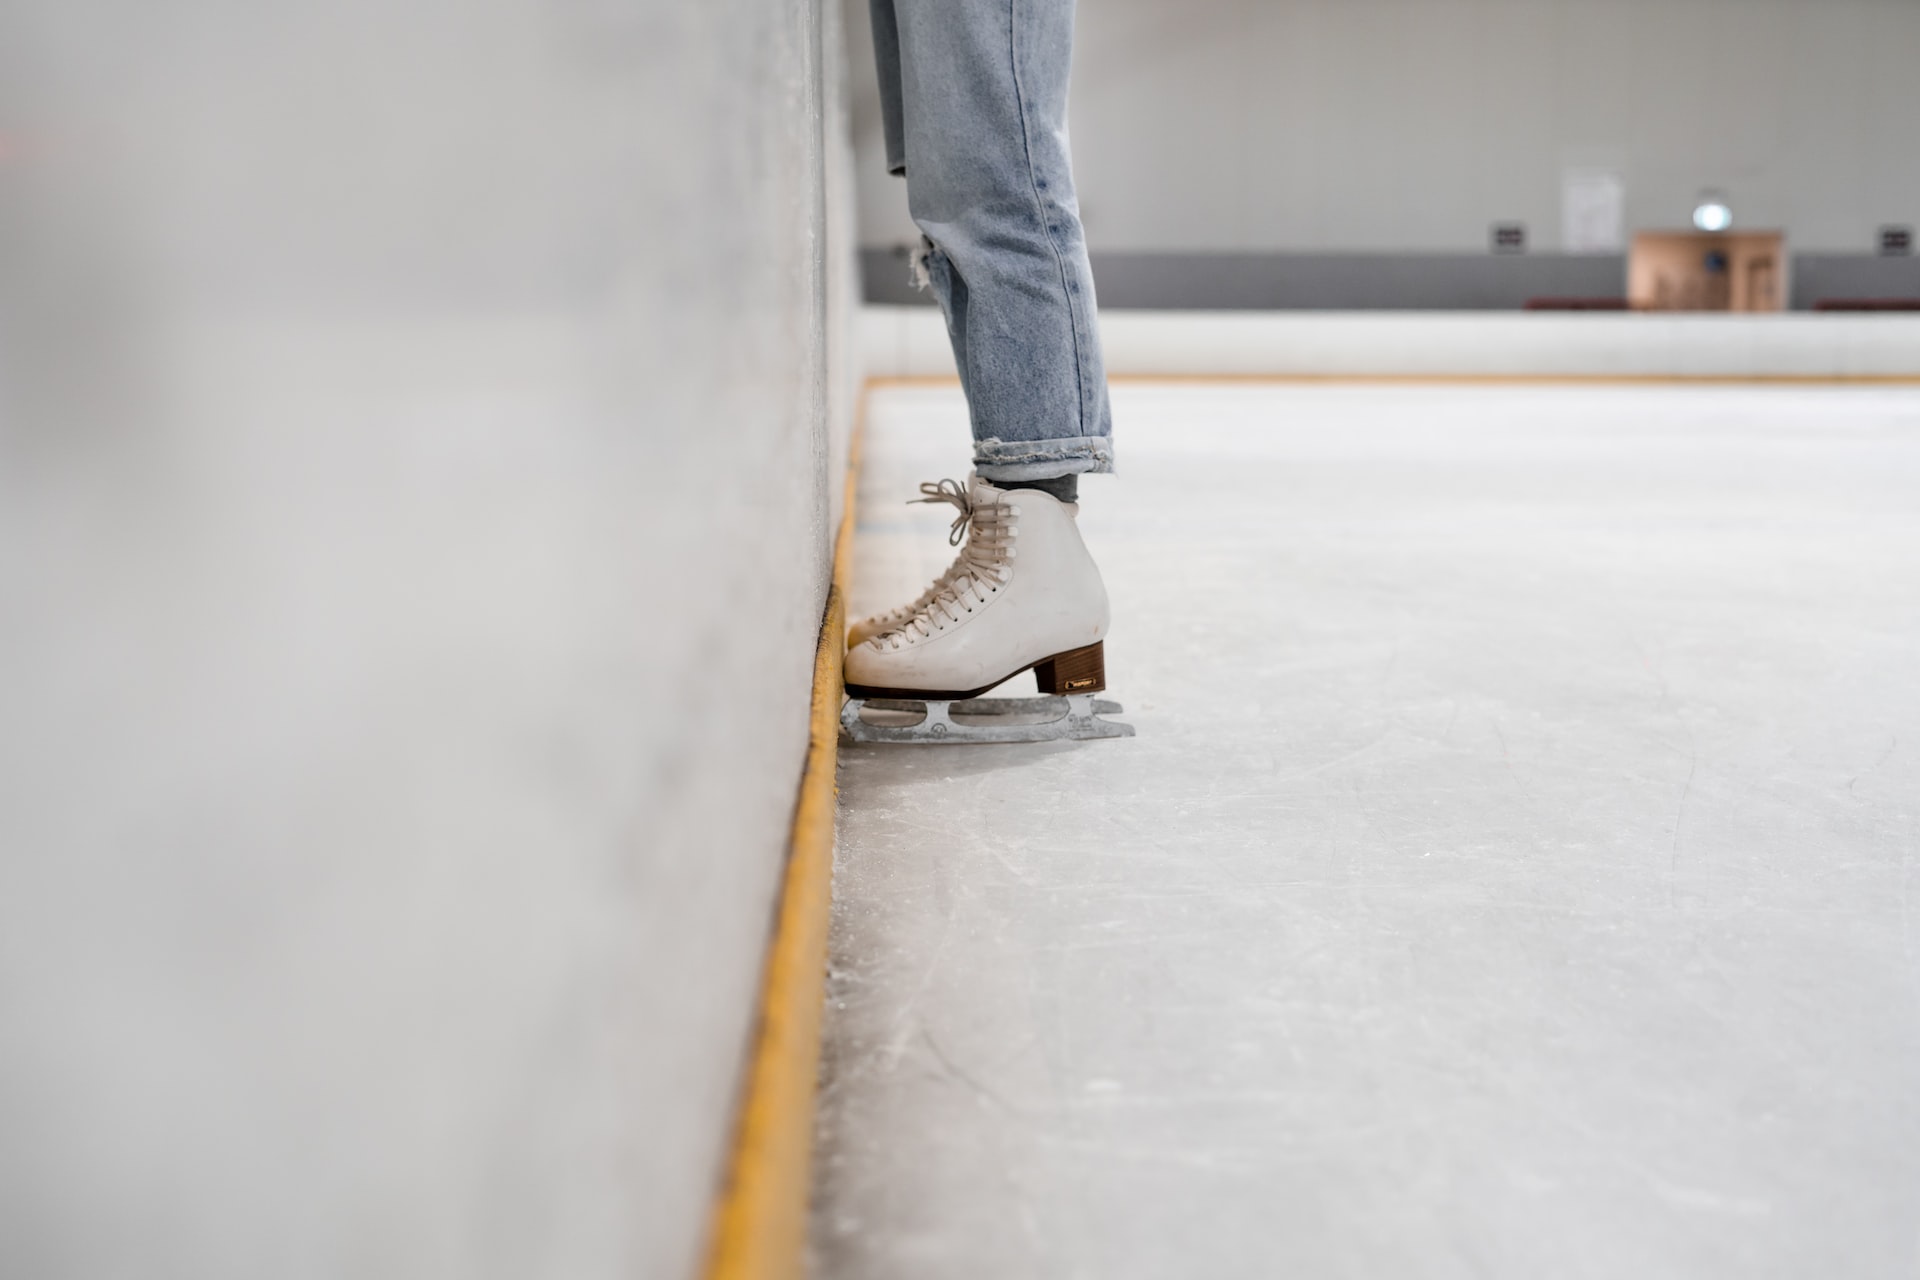 White ice skates up against the wall in an indoor rink.